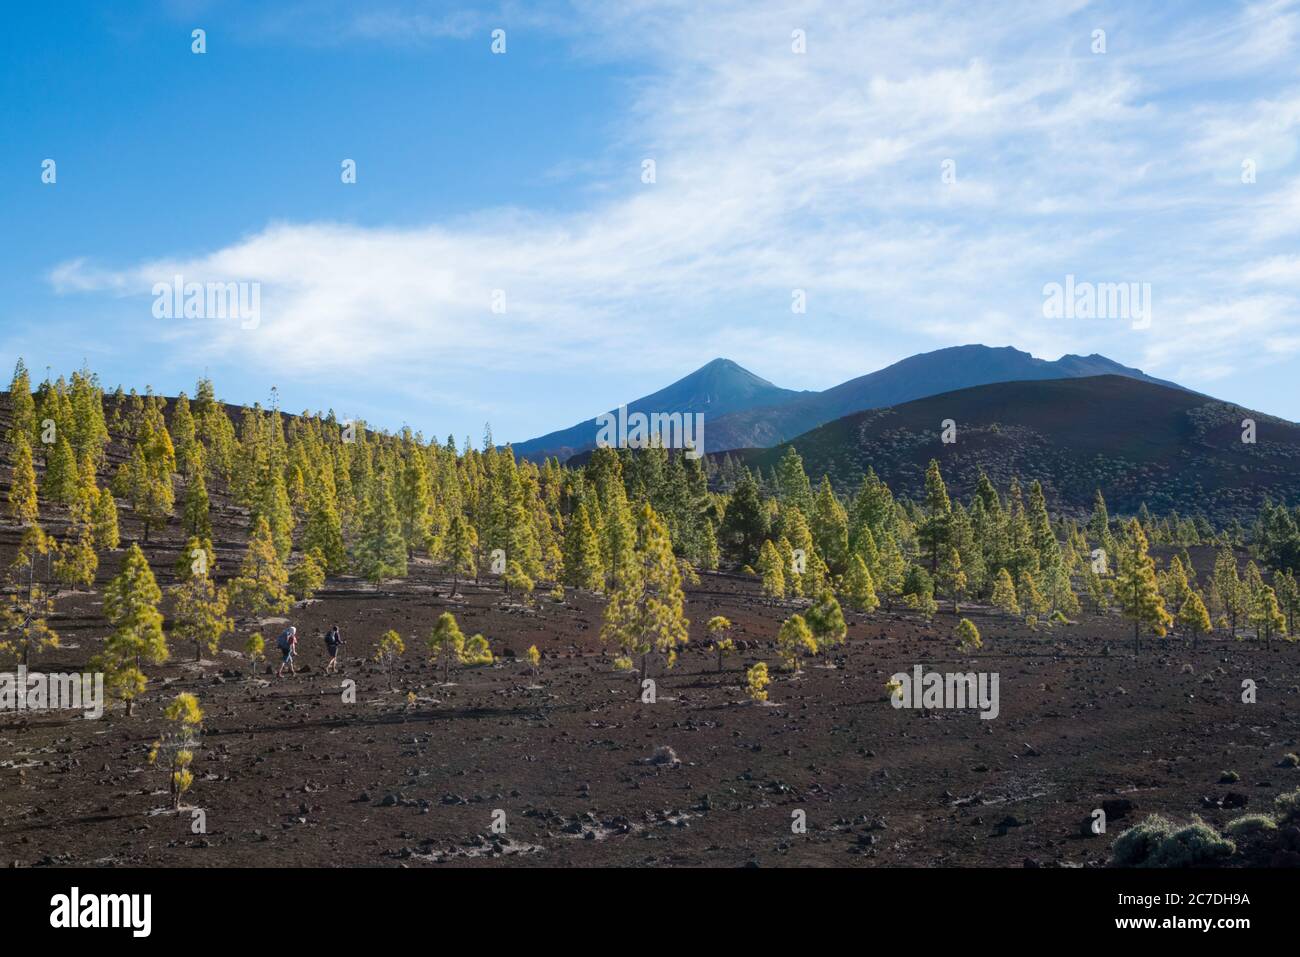 Hiking up Mount Teide in Tenerife, Canary Islands, Spain Stock Photo